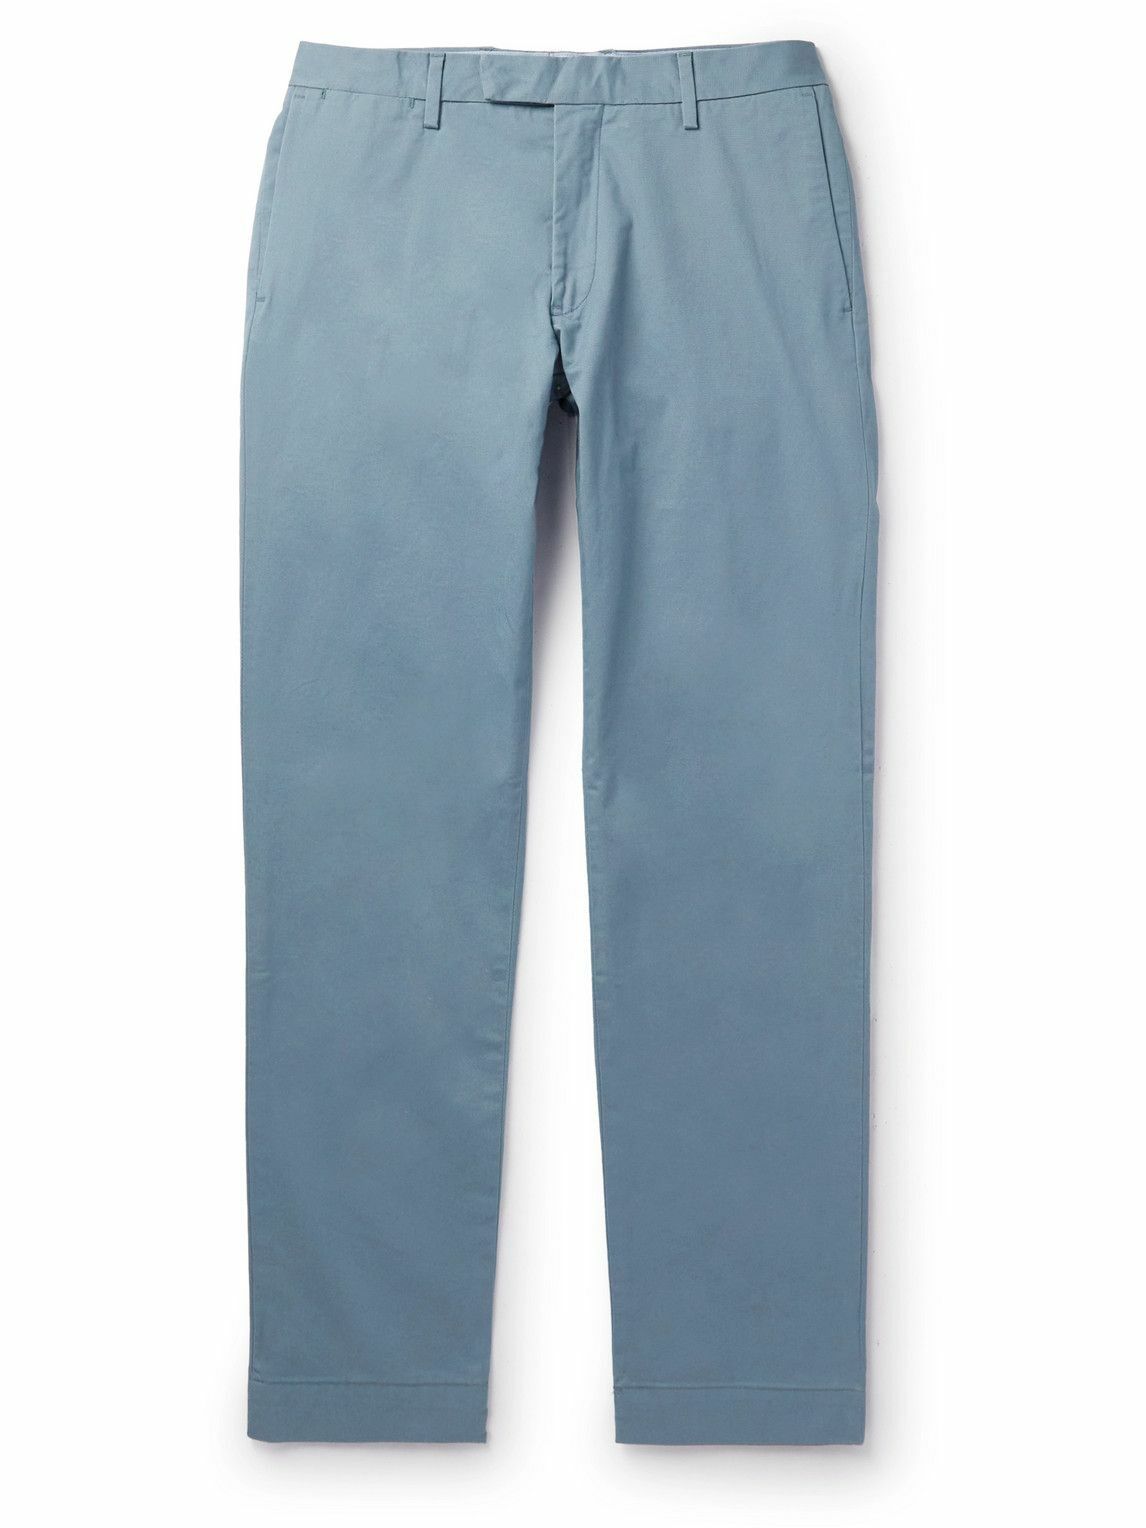 Polo Ralph Lauren - Slim-Fit Cotton-Blend Twill Chinos - Blue Polo ...